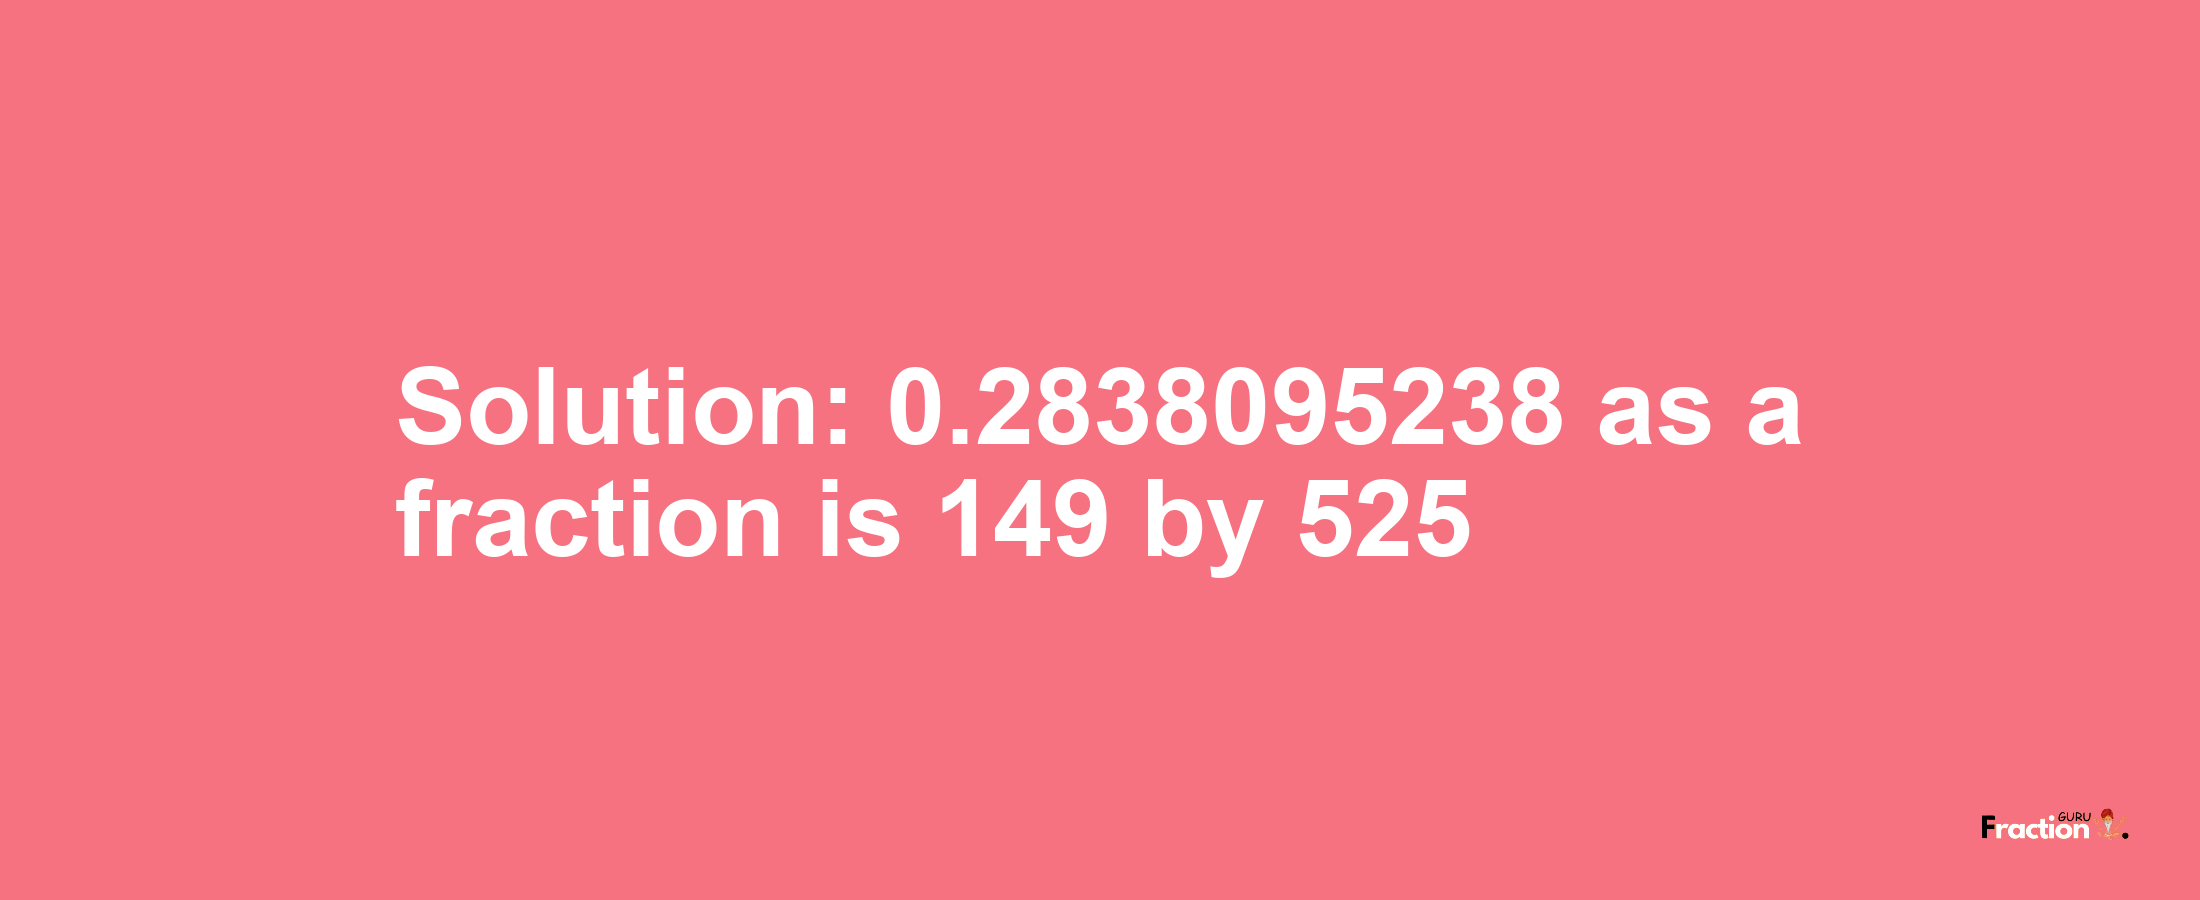 Solution:0.2838095238 as a fraction is 149/525